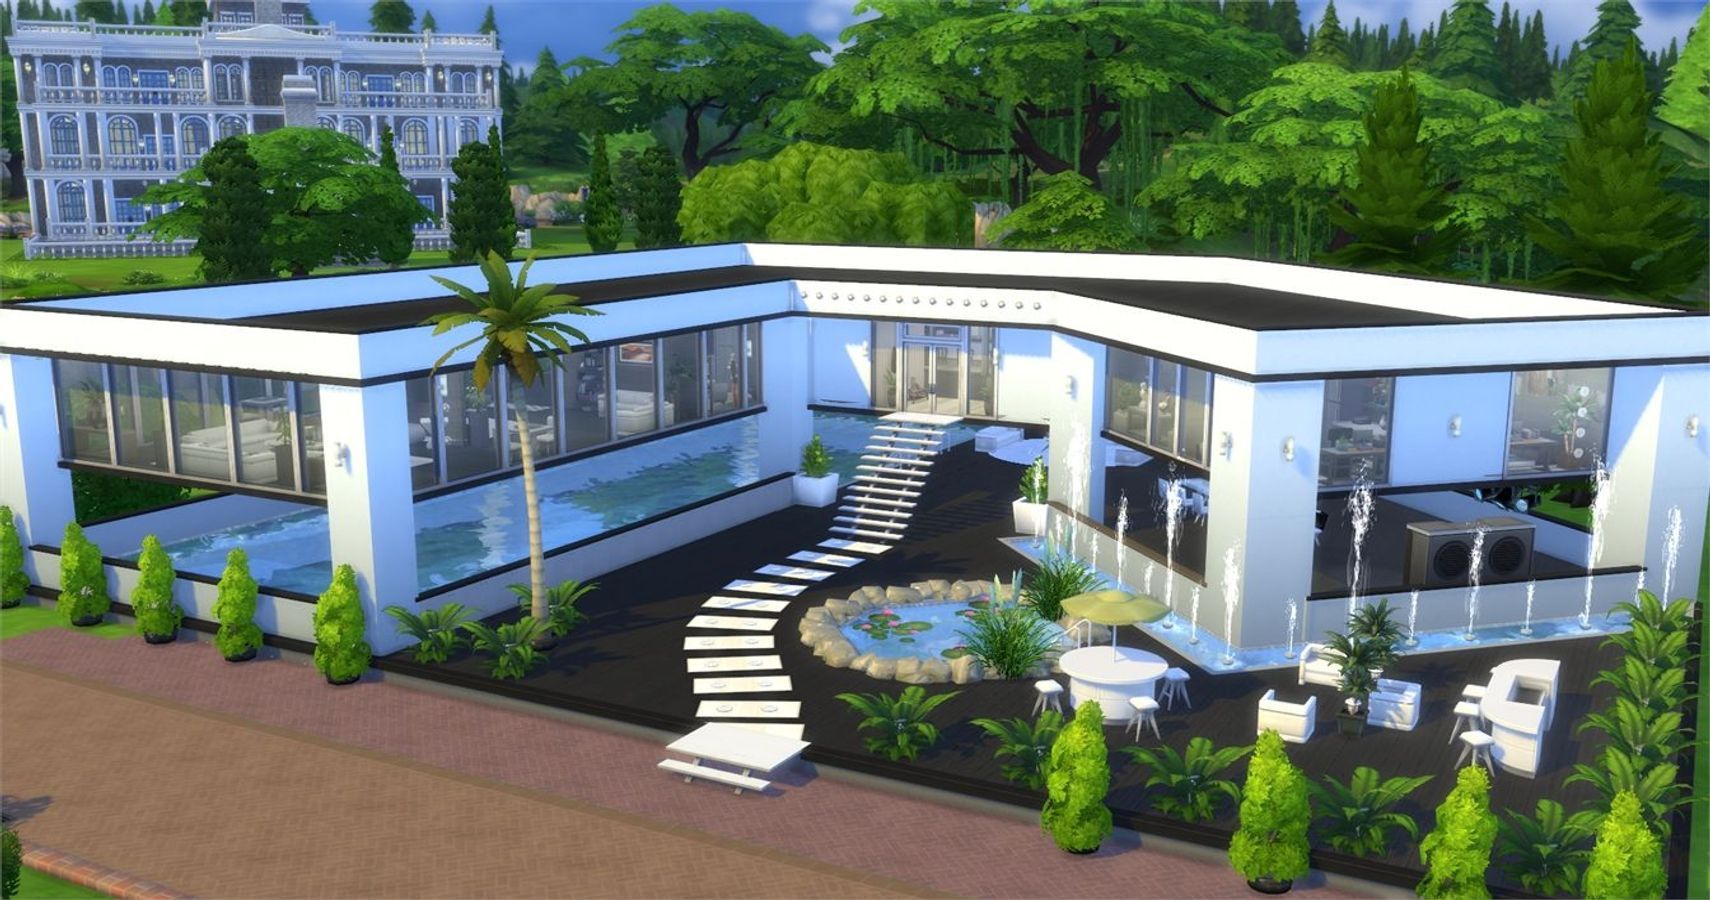 Sims 4 Building Cc Pack Sims 4 best mods for building - guidefer